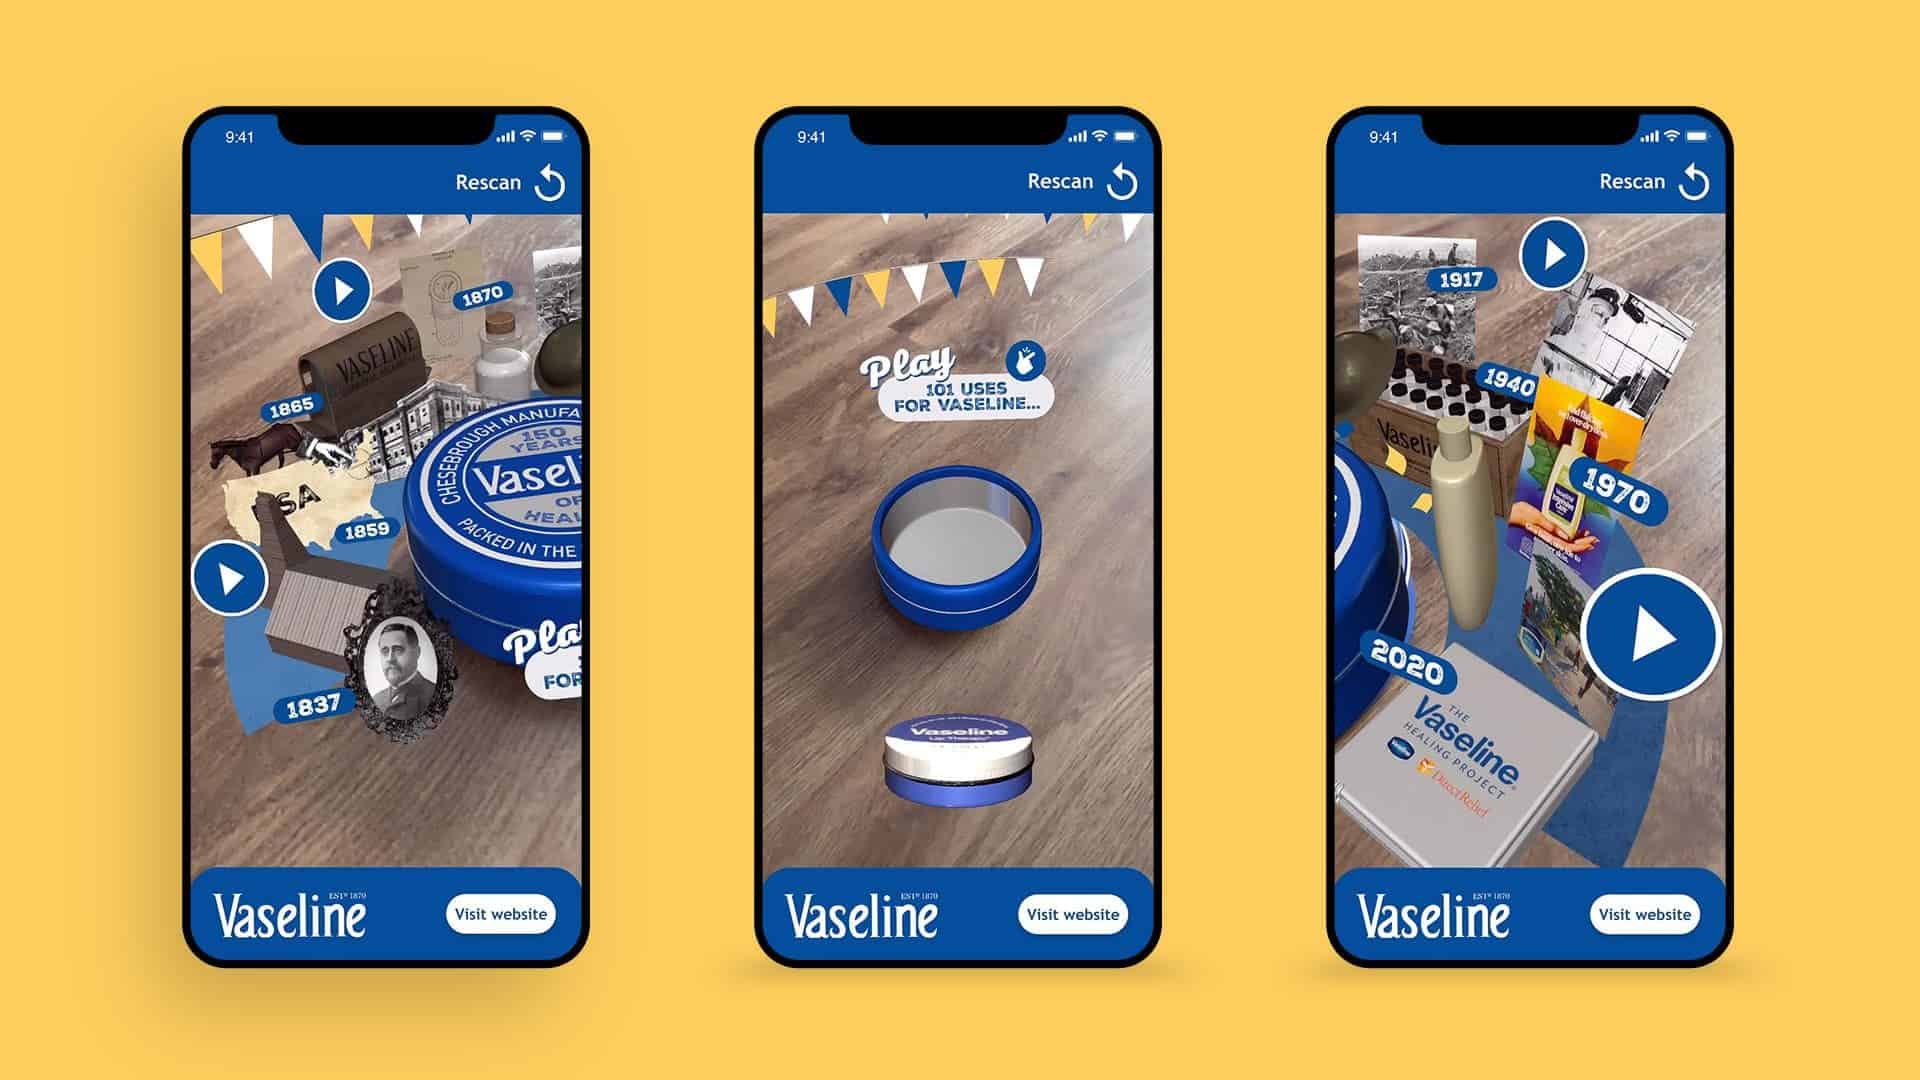 3 phones side by side showing the steps in a Vaseline AR experience.